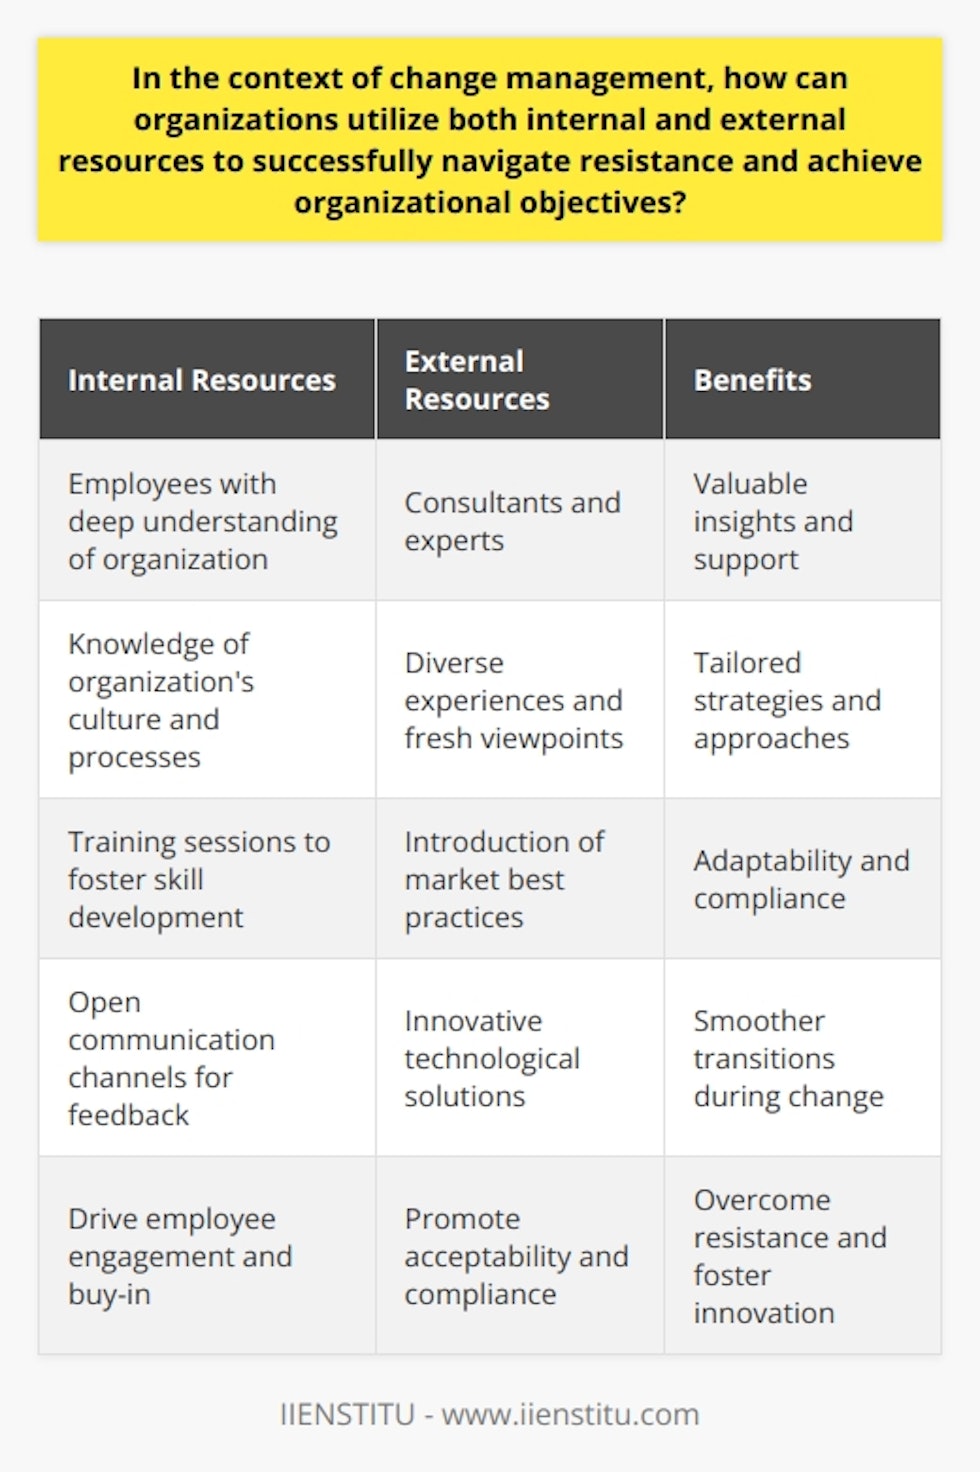 In the context of change management, organizations can effectively navigate resistance and achieve organizational objectives by leveraging both internal and external resources.One key strategy is the recognition and utilization of internal resources. Employees within the organization have a deep understanding of its workings and can provide valuable insights and support during times of change. Their knowledge of the organization's culture and processes allows the change team to tailor appropriate strategies and approaches. To further enhance their ability to adapt to change, training sessions can be conducted to foster skill development. Open communication channels also play a crucial role in managing resistance, as they encourage feedback and promote a sense of ownership among employees.In addition to internal resources, organizations can also benefit from utilizing external resources. Consultants and experts provide valuable perspectives and insights into change management. Their diverse experiences enable them to offer fresh and unbiased viewpoints, which can be crucial in overcoming resistance. These external resources can introduce market best practices to navigate change resistance and promote acceptability and compliance. Furthermore, third-party organizations can offer innovative technological solutions that facilitate smoother transitions during times of change.By effectively leveraging both internal and external resources, organizations can lay the groundwork for achieving their organizational objectives. A well-planned approach that harnesses the strengths of both internal and external resources drives employee engagement and fosters buy-in from all levels of the organization. As acceptance of change grows, the organization moves closer to its intended objectives. Therefore, organizations can overcome resistance, foster innovation, and ultimately achieve their organizational objectives through the judicious use of both internal and external resources.